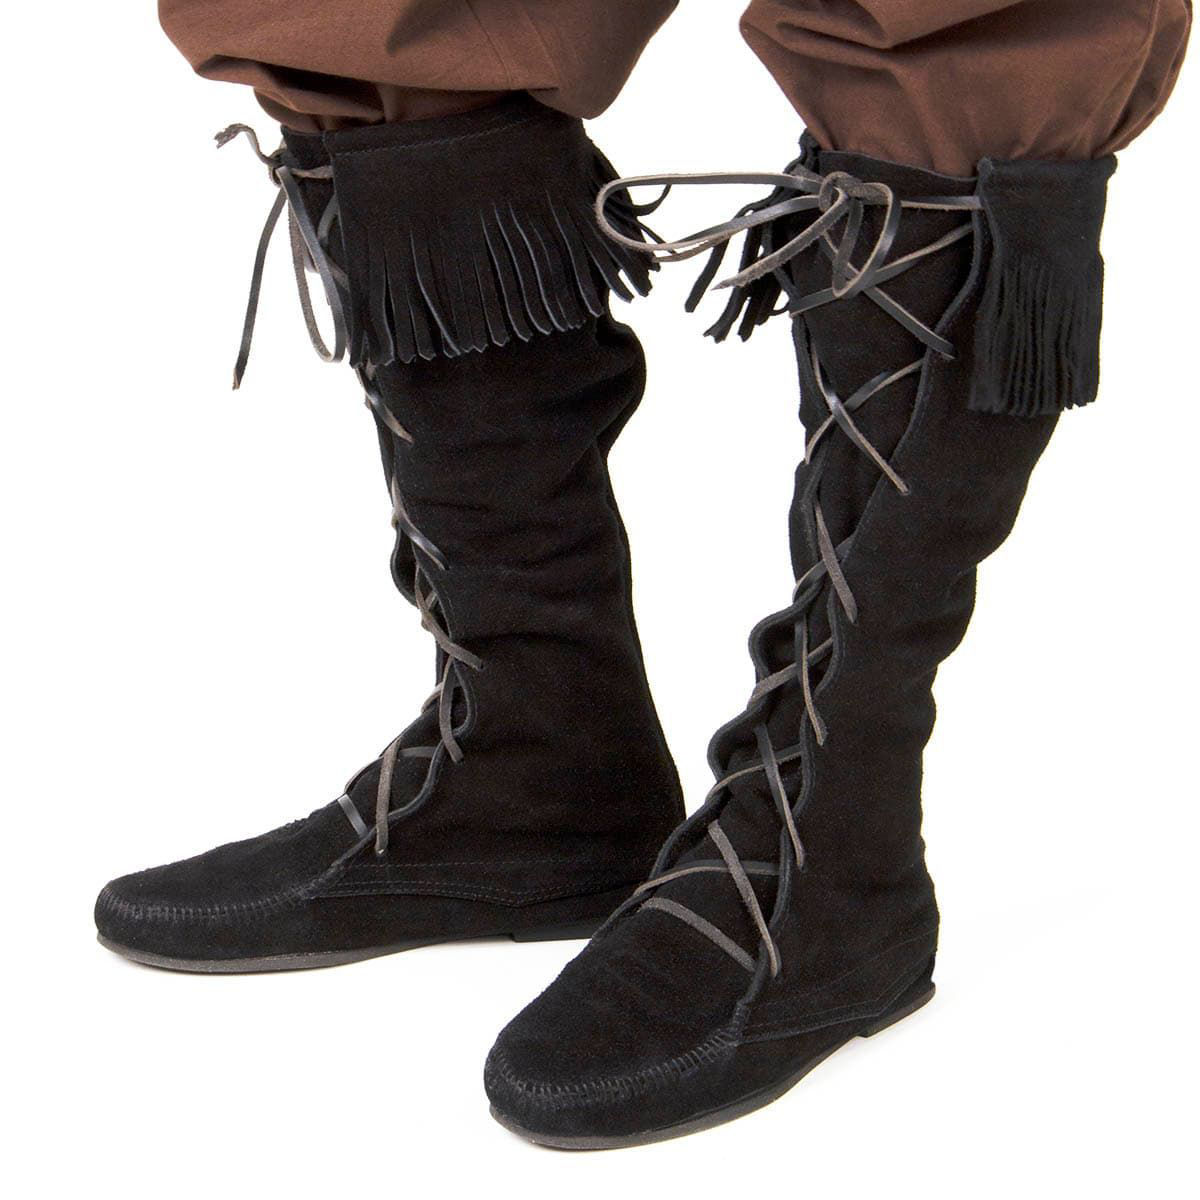 tall black suede boots with fringe have a comfortable rubber sole so you can wear them all day long